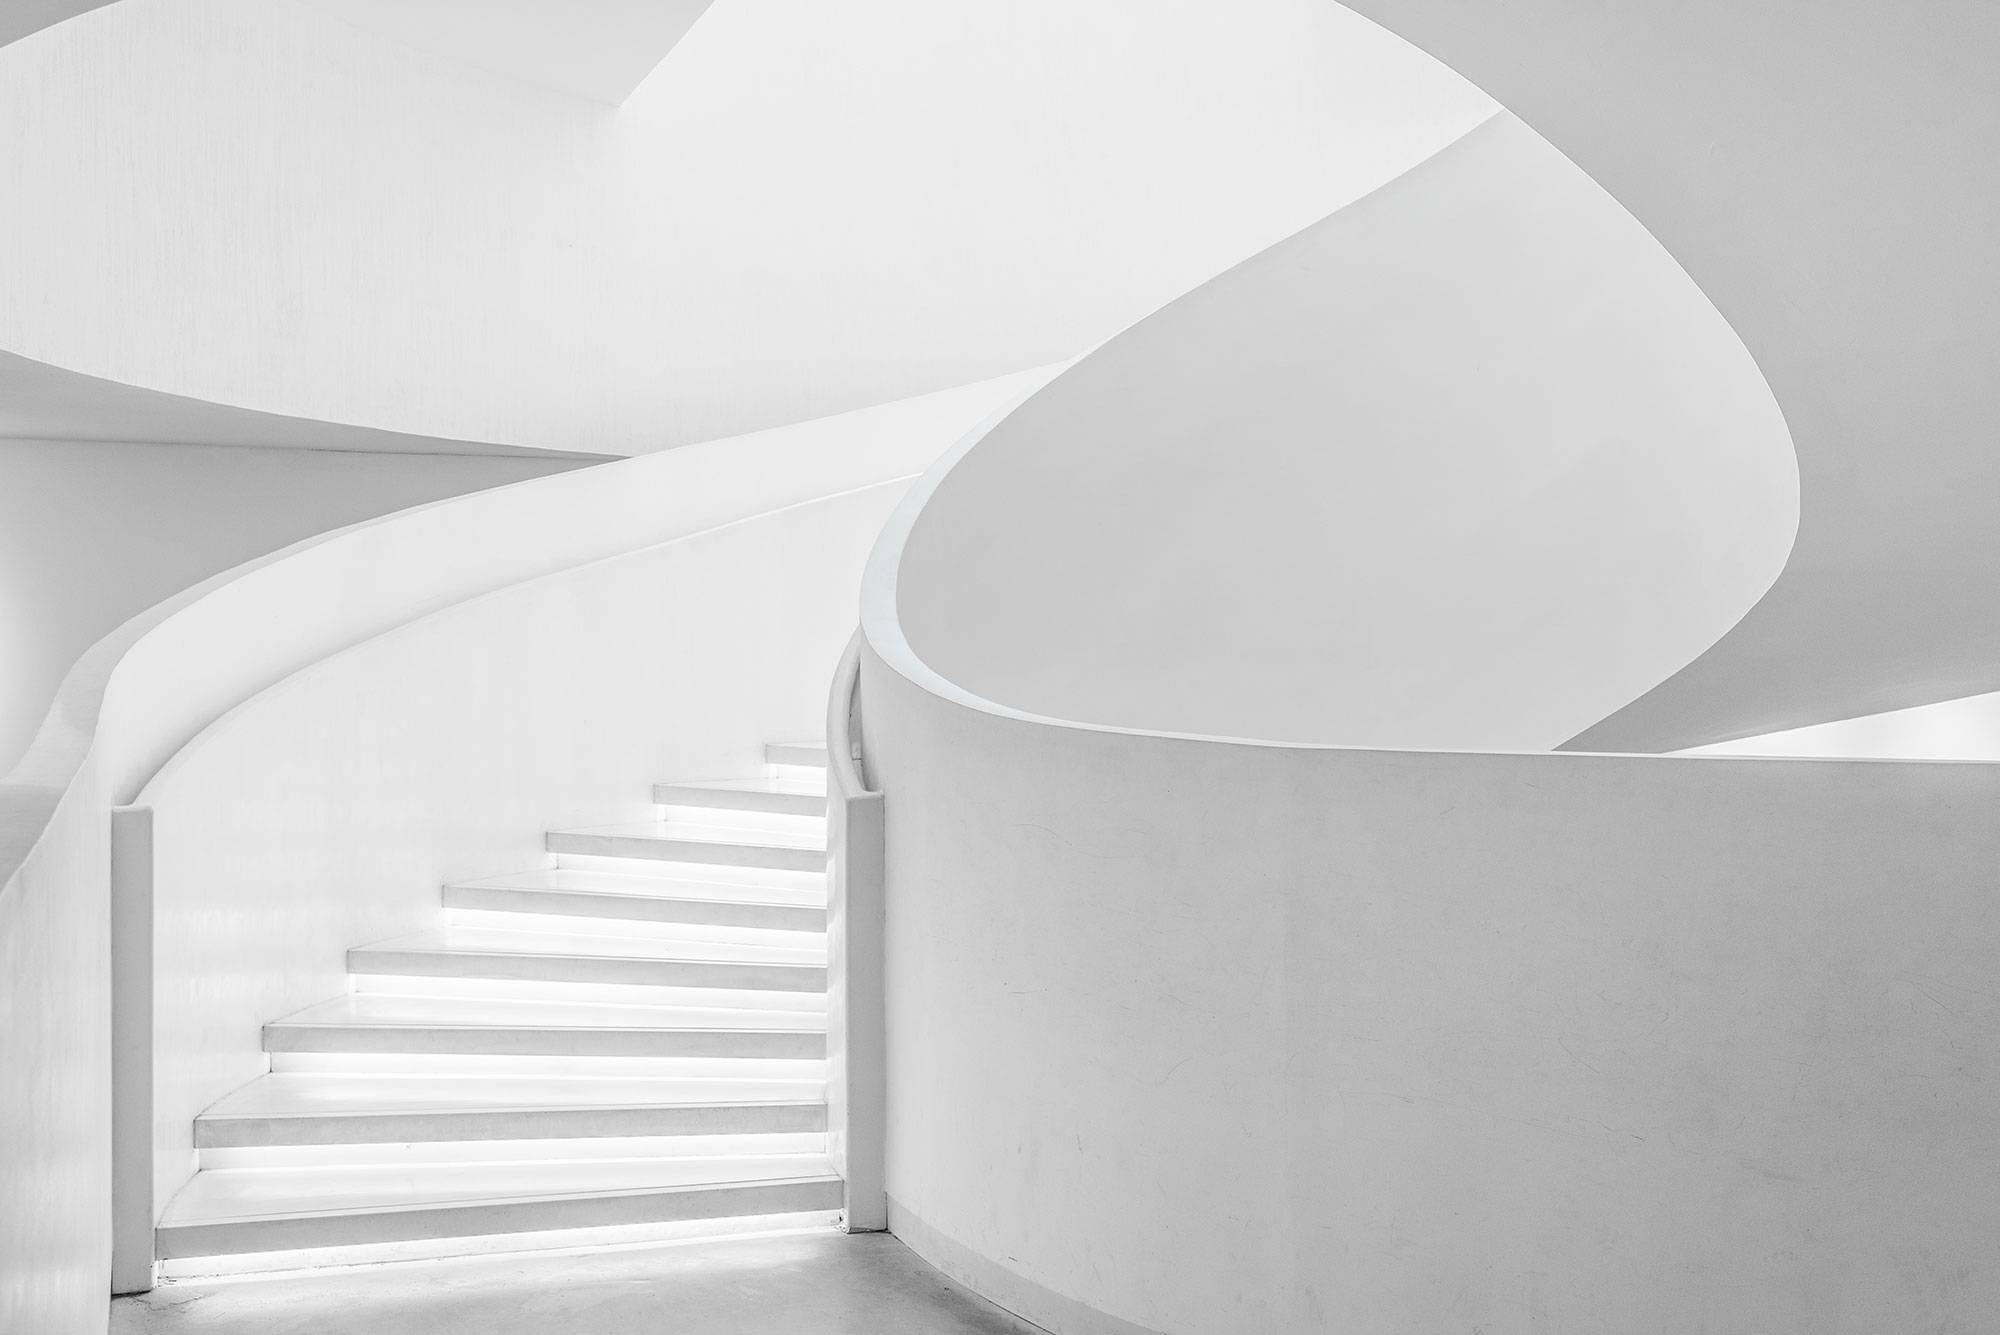 The view of empty space in white architecture